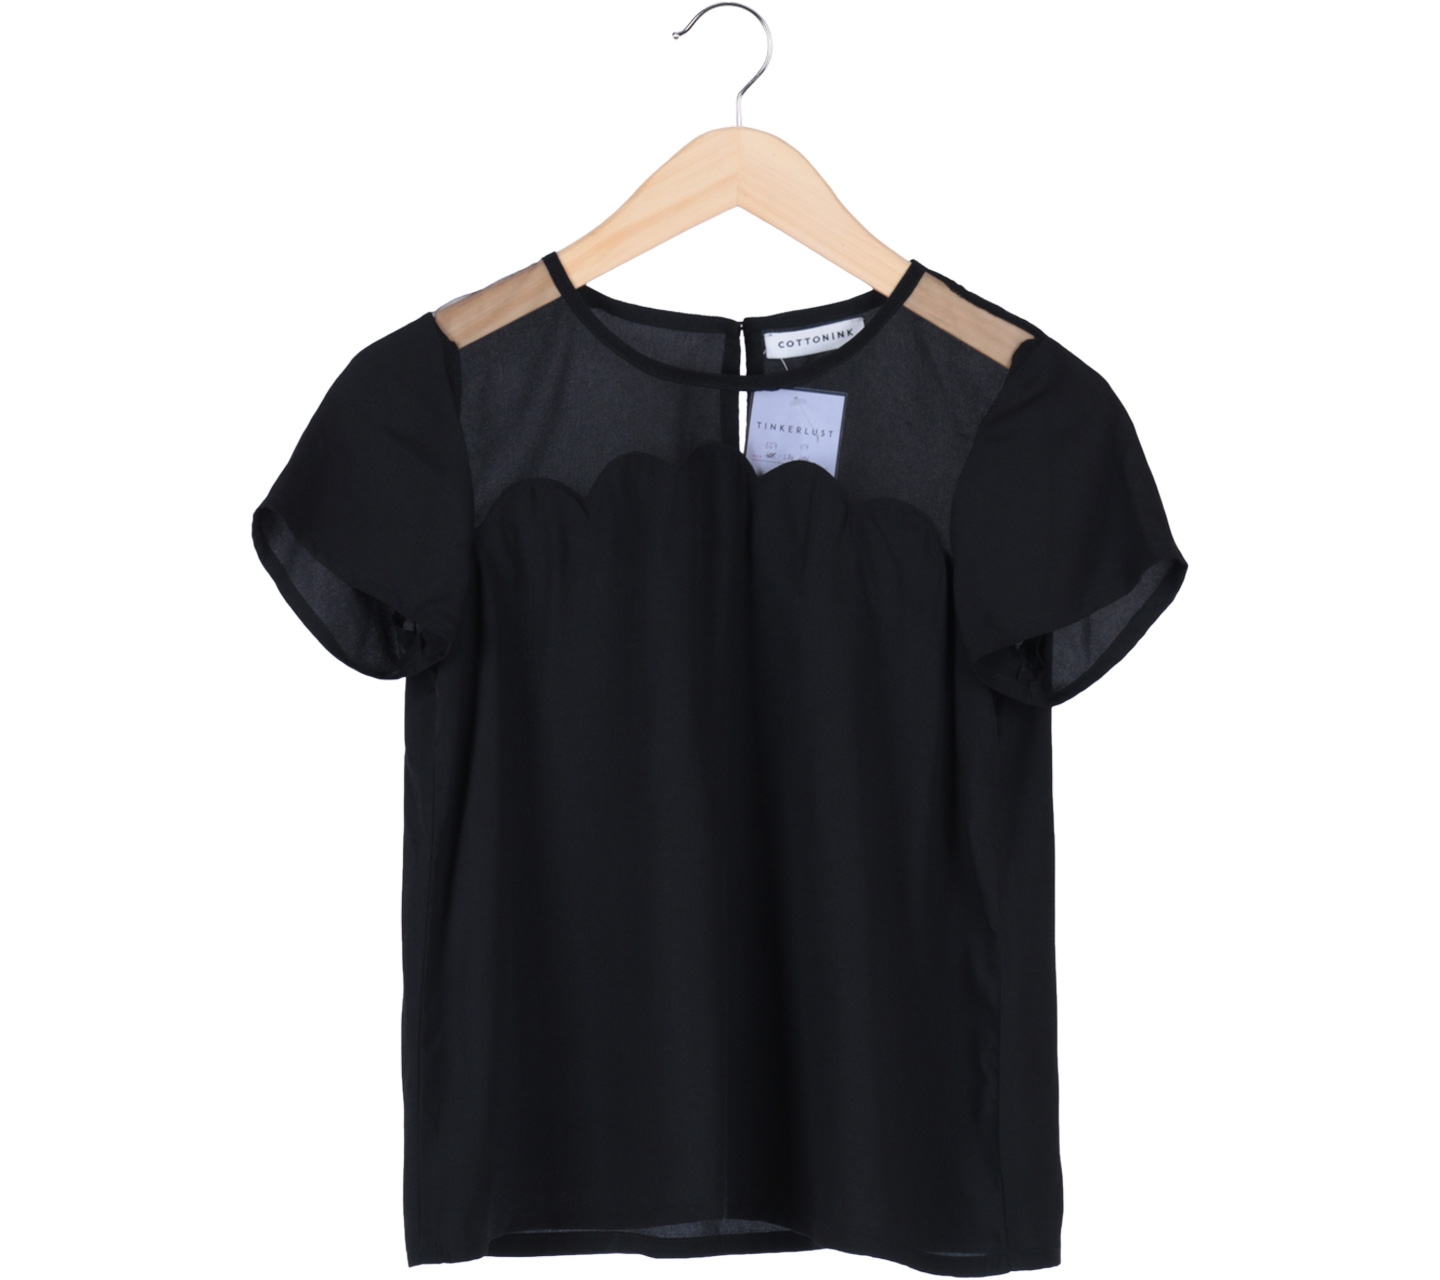 Cotton Ink Black Sheer Scallop Blouse